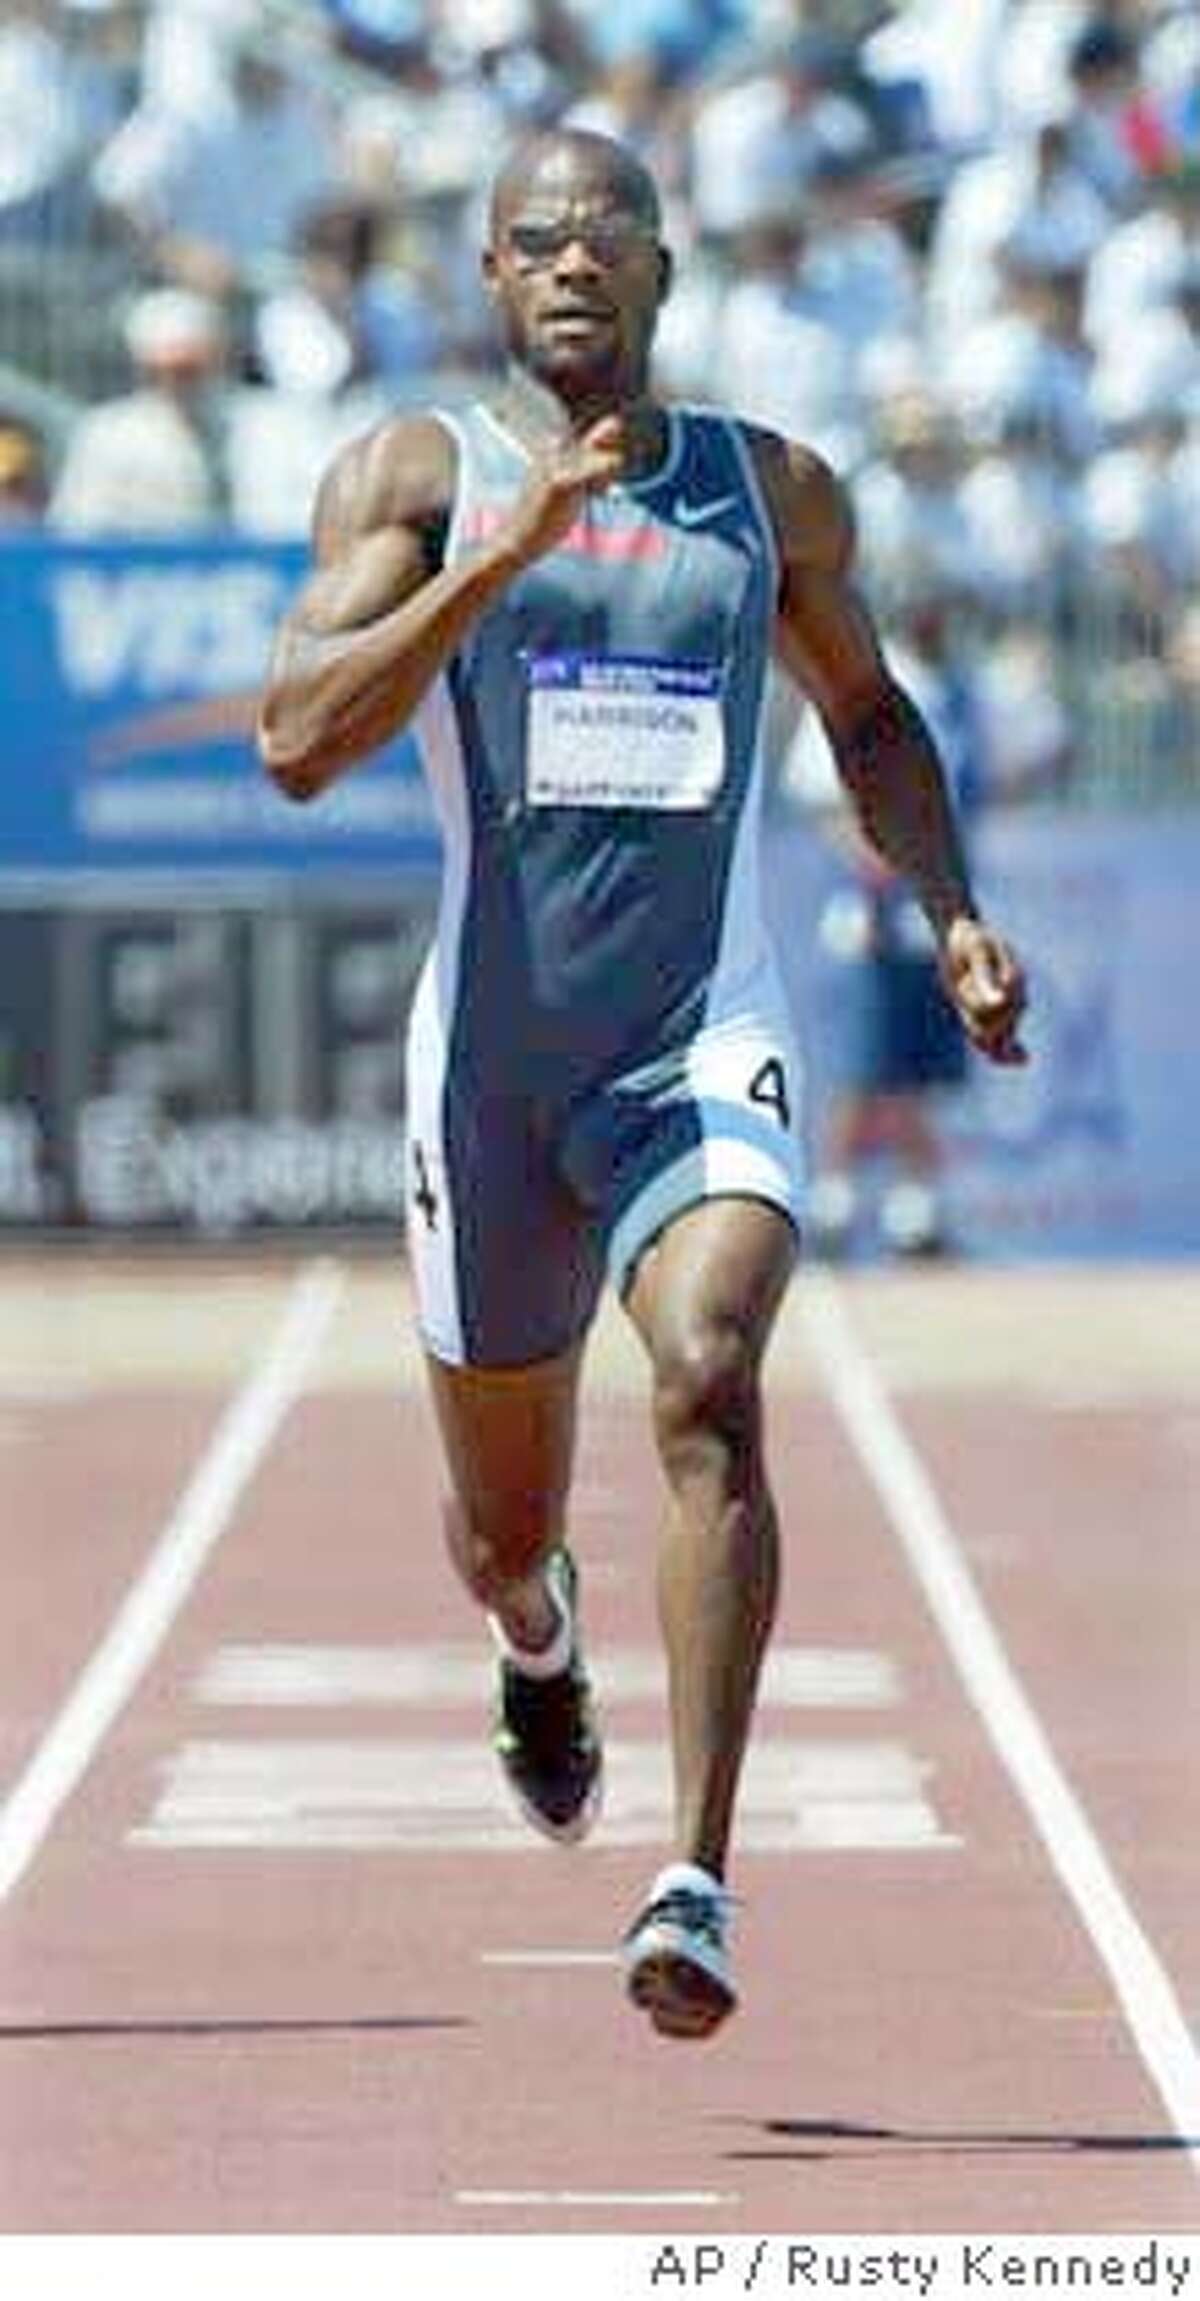 ** FILE ** Calvin Harrison in action during the men's 400 meter qualifying dash at the U.S. Olympic track and field trials in Sacramento, Calif., in this July 11, 2004 file photo. Harrison was suspended Monday, Aug. 2, 2004 for two years for a second doping violation, making him ineligible for the Athens Olympics. The U.S. Anti-Doping Agency said Harrison tested positive for the prohibited stimulant modafinil at the USA Outdoor Track & Field Championships at Stanford, Calif. on June 21, 2003. (AP Photo/Rusty Kennedy)